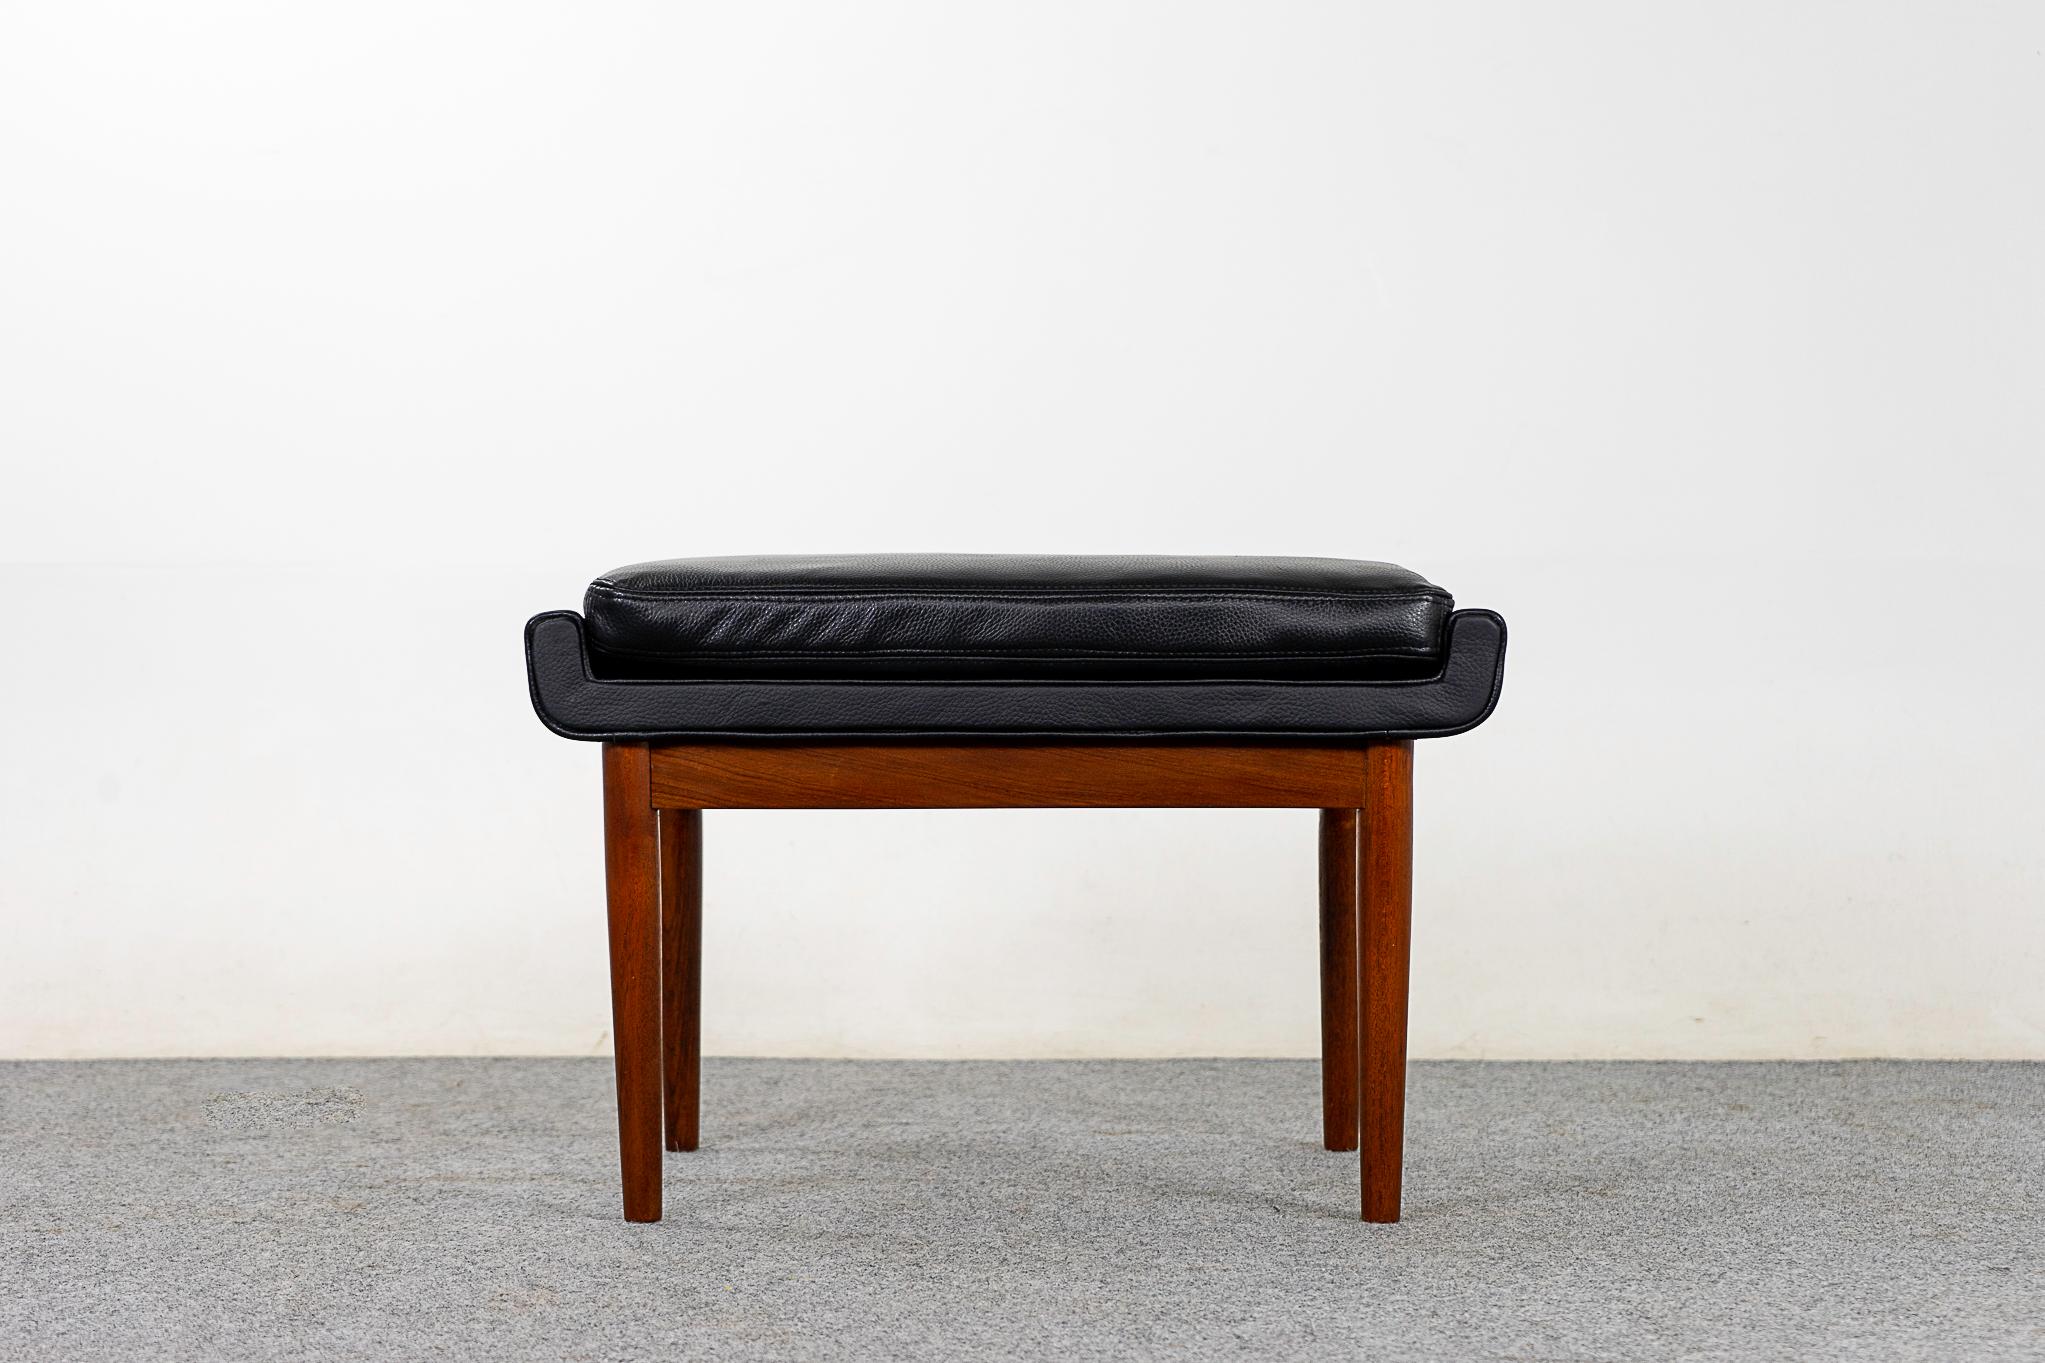 Leather and teak footstool, circa 1960s. Compact design can be used with virtually any seating type. Gorgeous leather with a soft pebble pattern. Sumptuous, pristine!

Please inquire for international shipping rates.